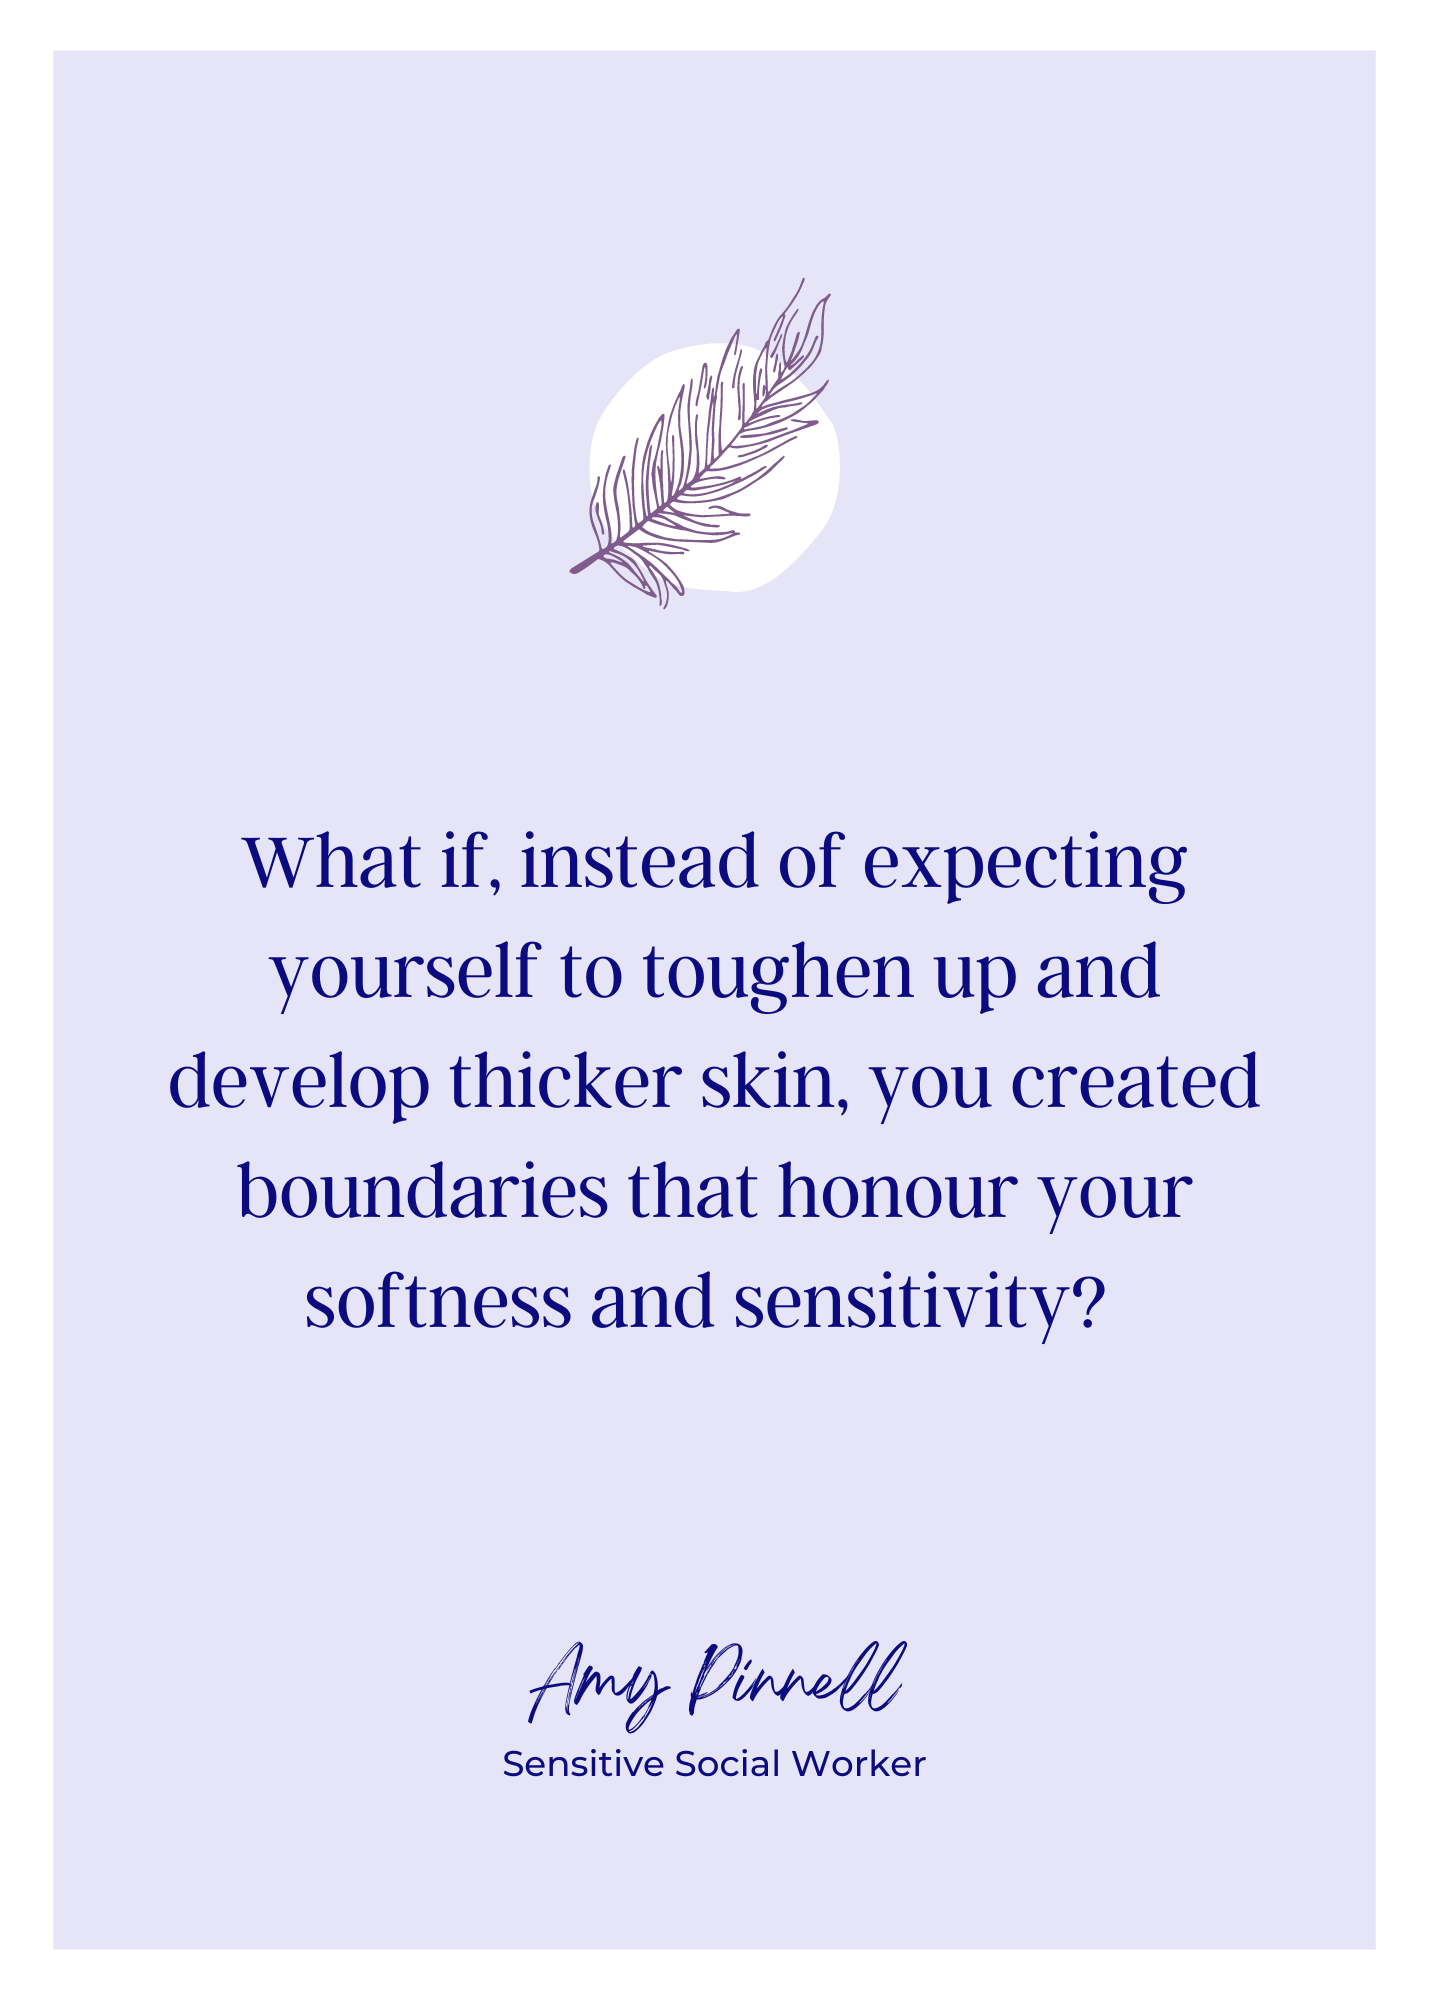 An electronic version of the print is shown. The background is light purple framed with white. The font is dark purple and reads "What if, instead of expecting yourself to toughen up and develop thicker skin, you created boundaries that honour your softness and sensitivity? - Amy Pinnell, Sensitive Social Worker". Centered at the top of the print is a purple sketch of a feather.